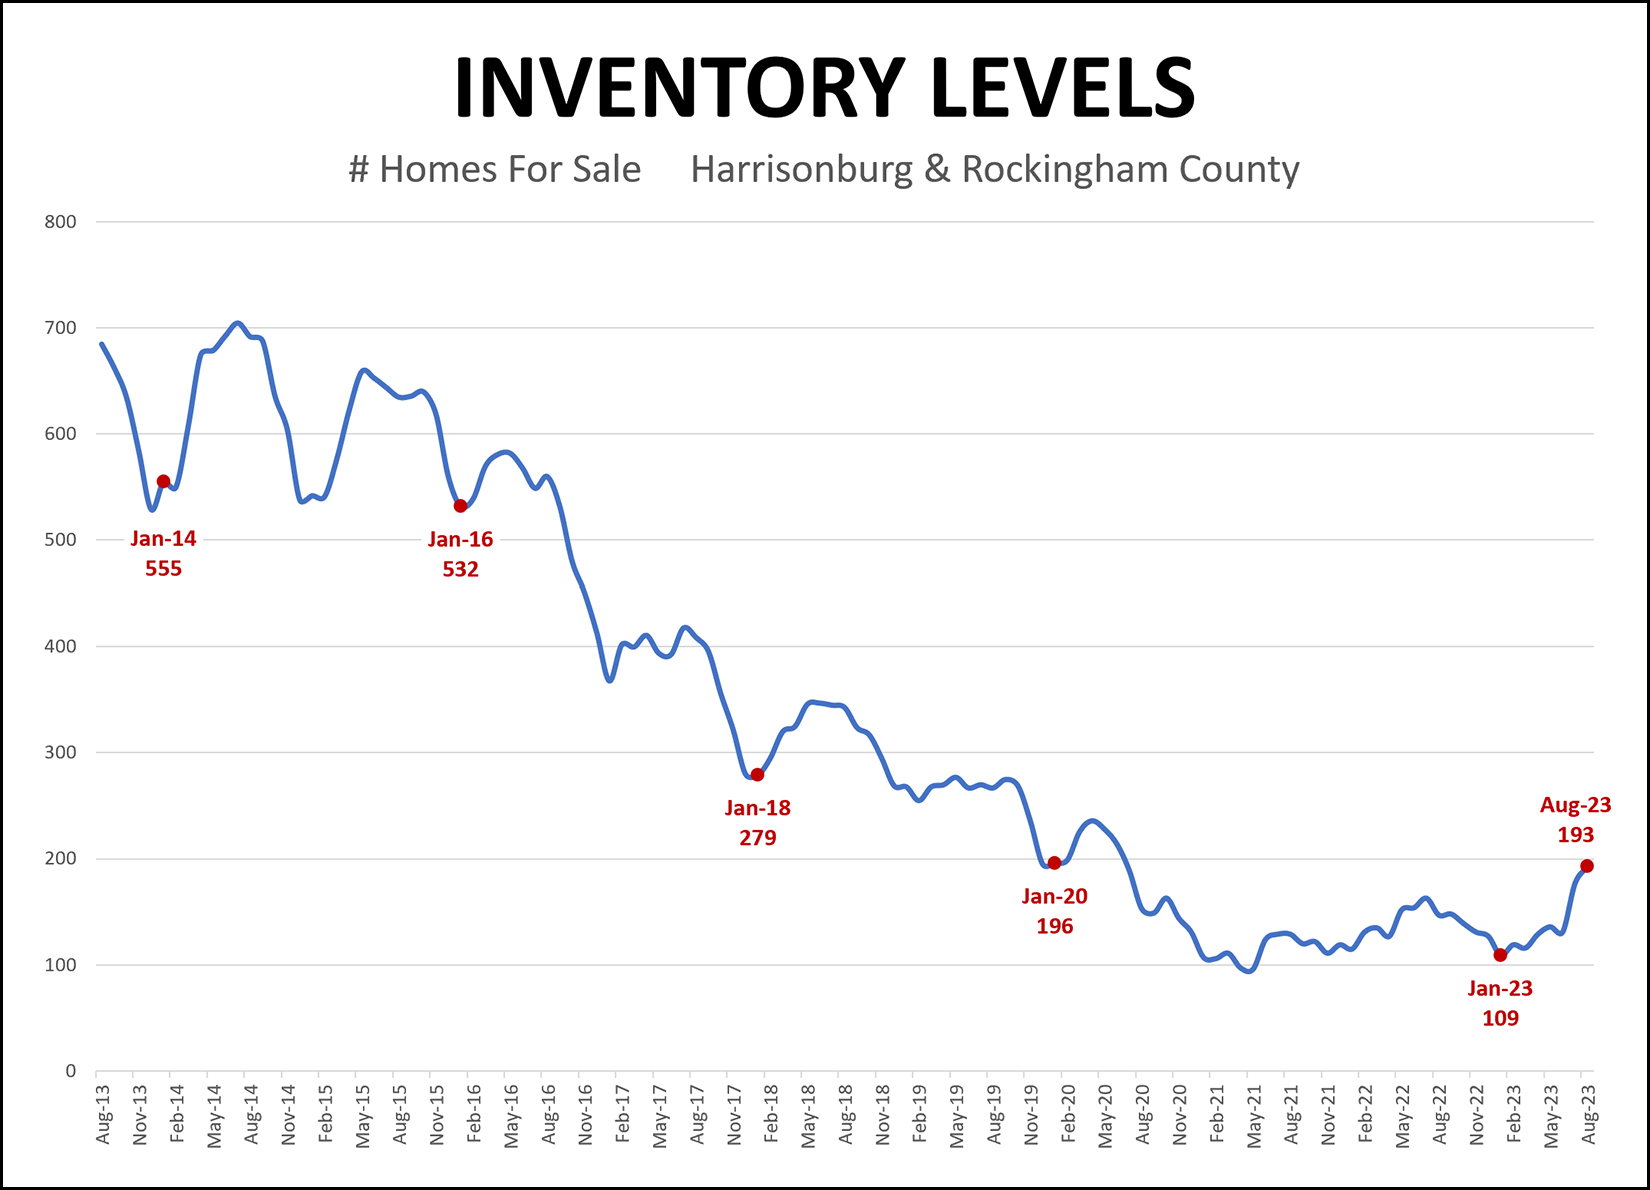 Inventory Levels Over Time